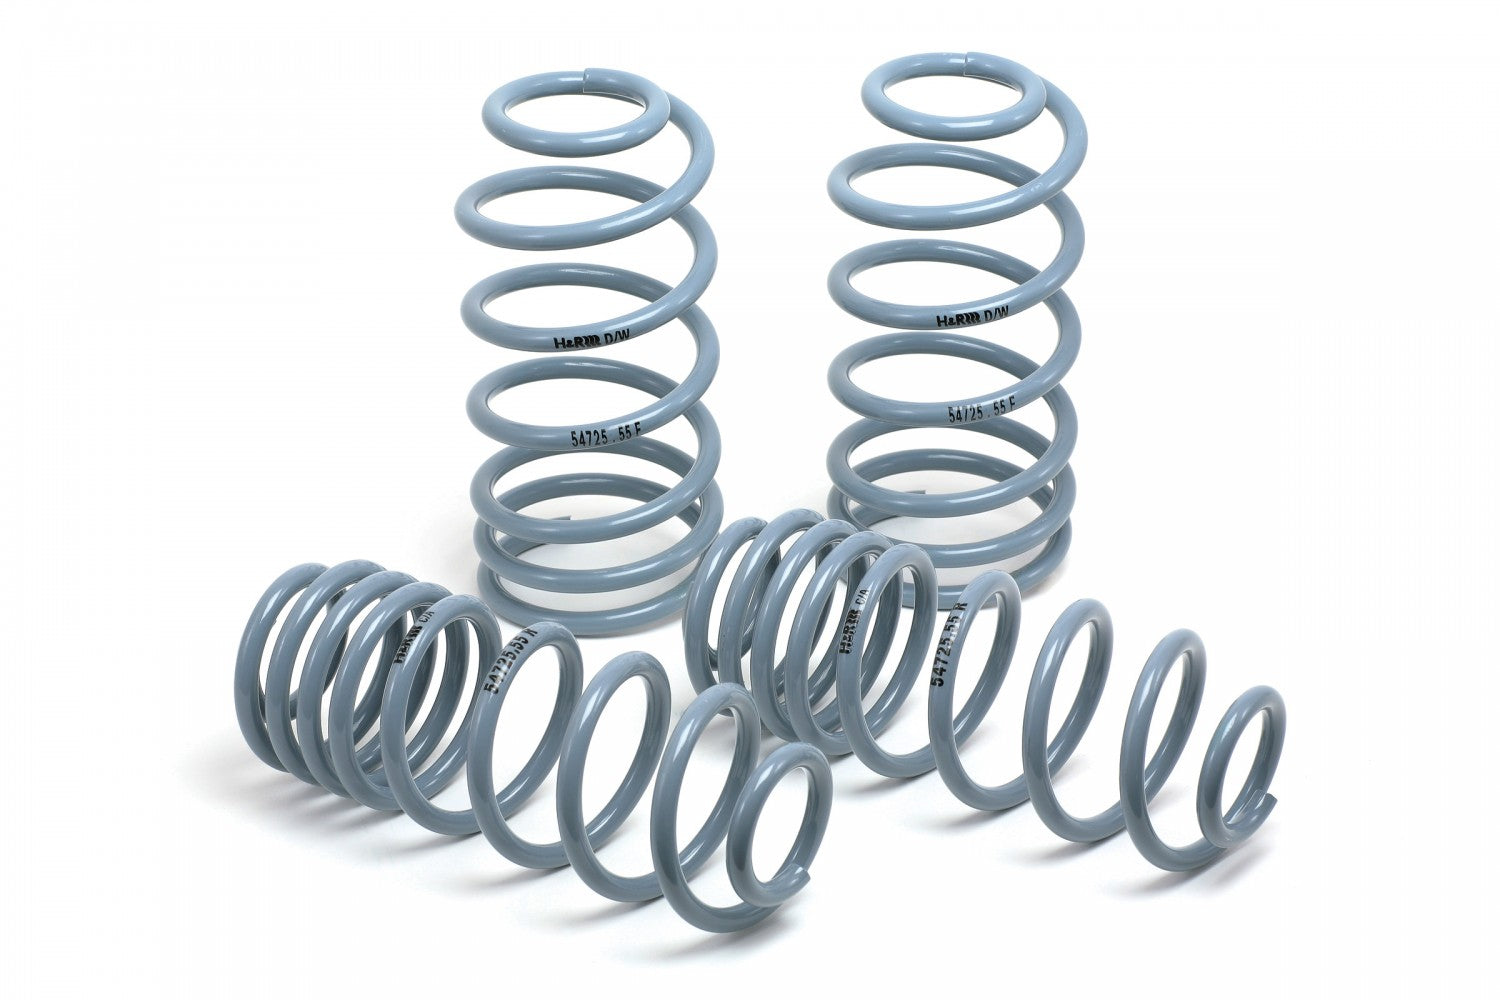 H&R SPRINGS | Racing Performance Parts & Equipment Toronto, Ontario and Quebec